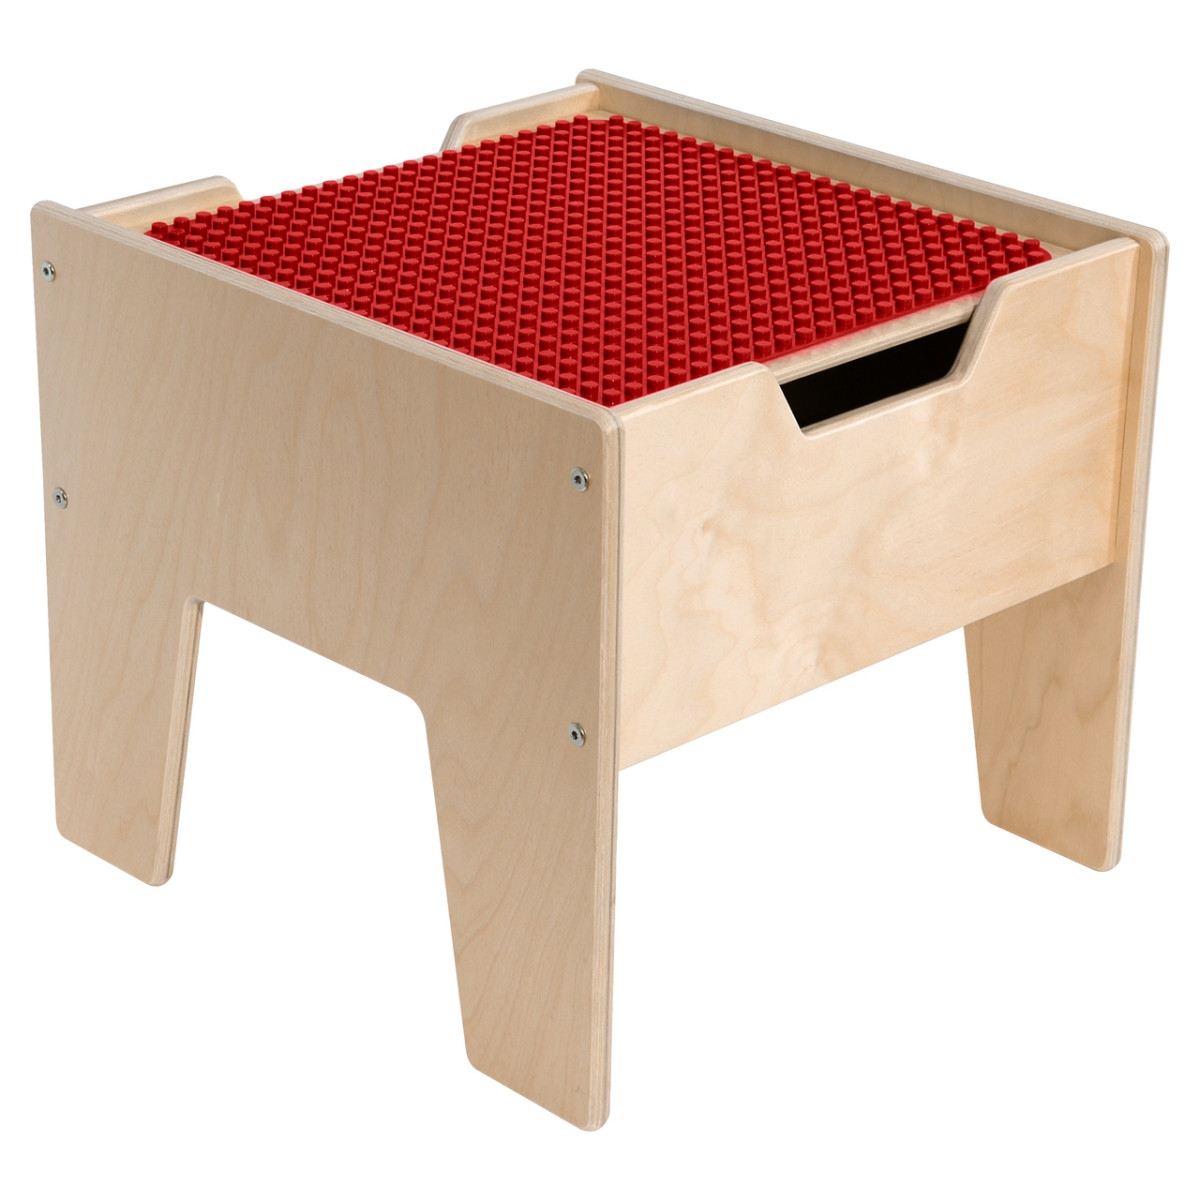 C991300f-pr 2-n-1 Activity Table With Red Duplo Compatible Top - Assembled